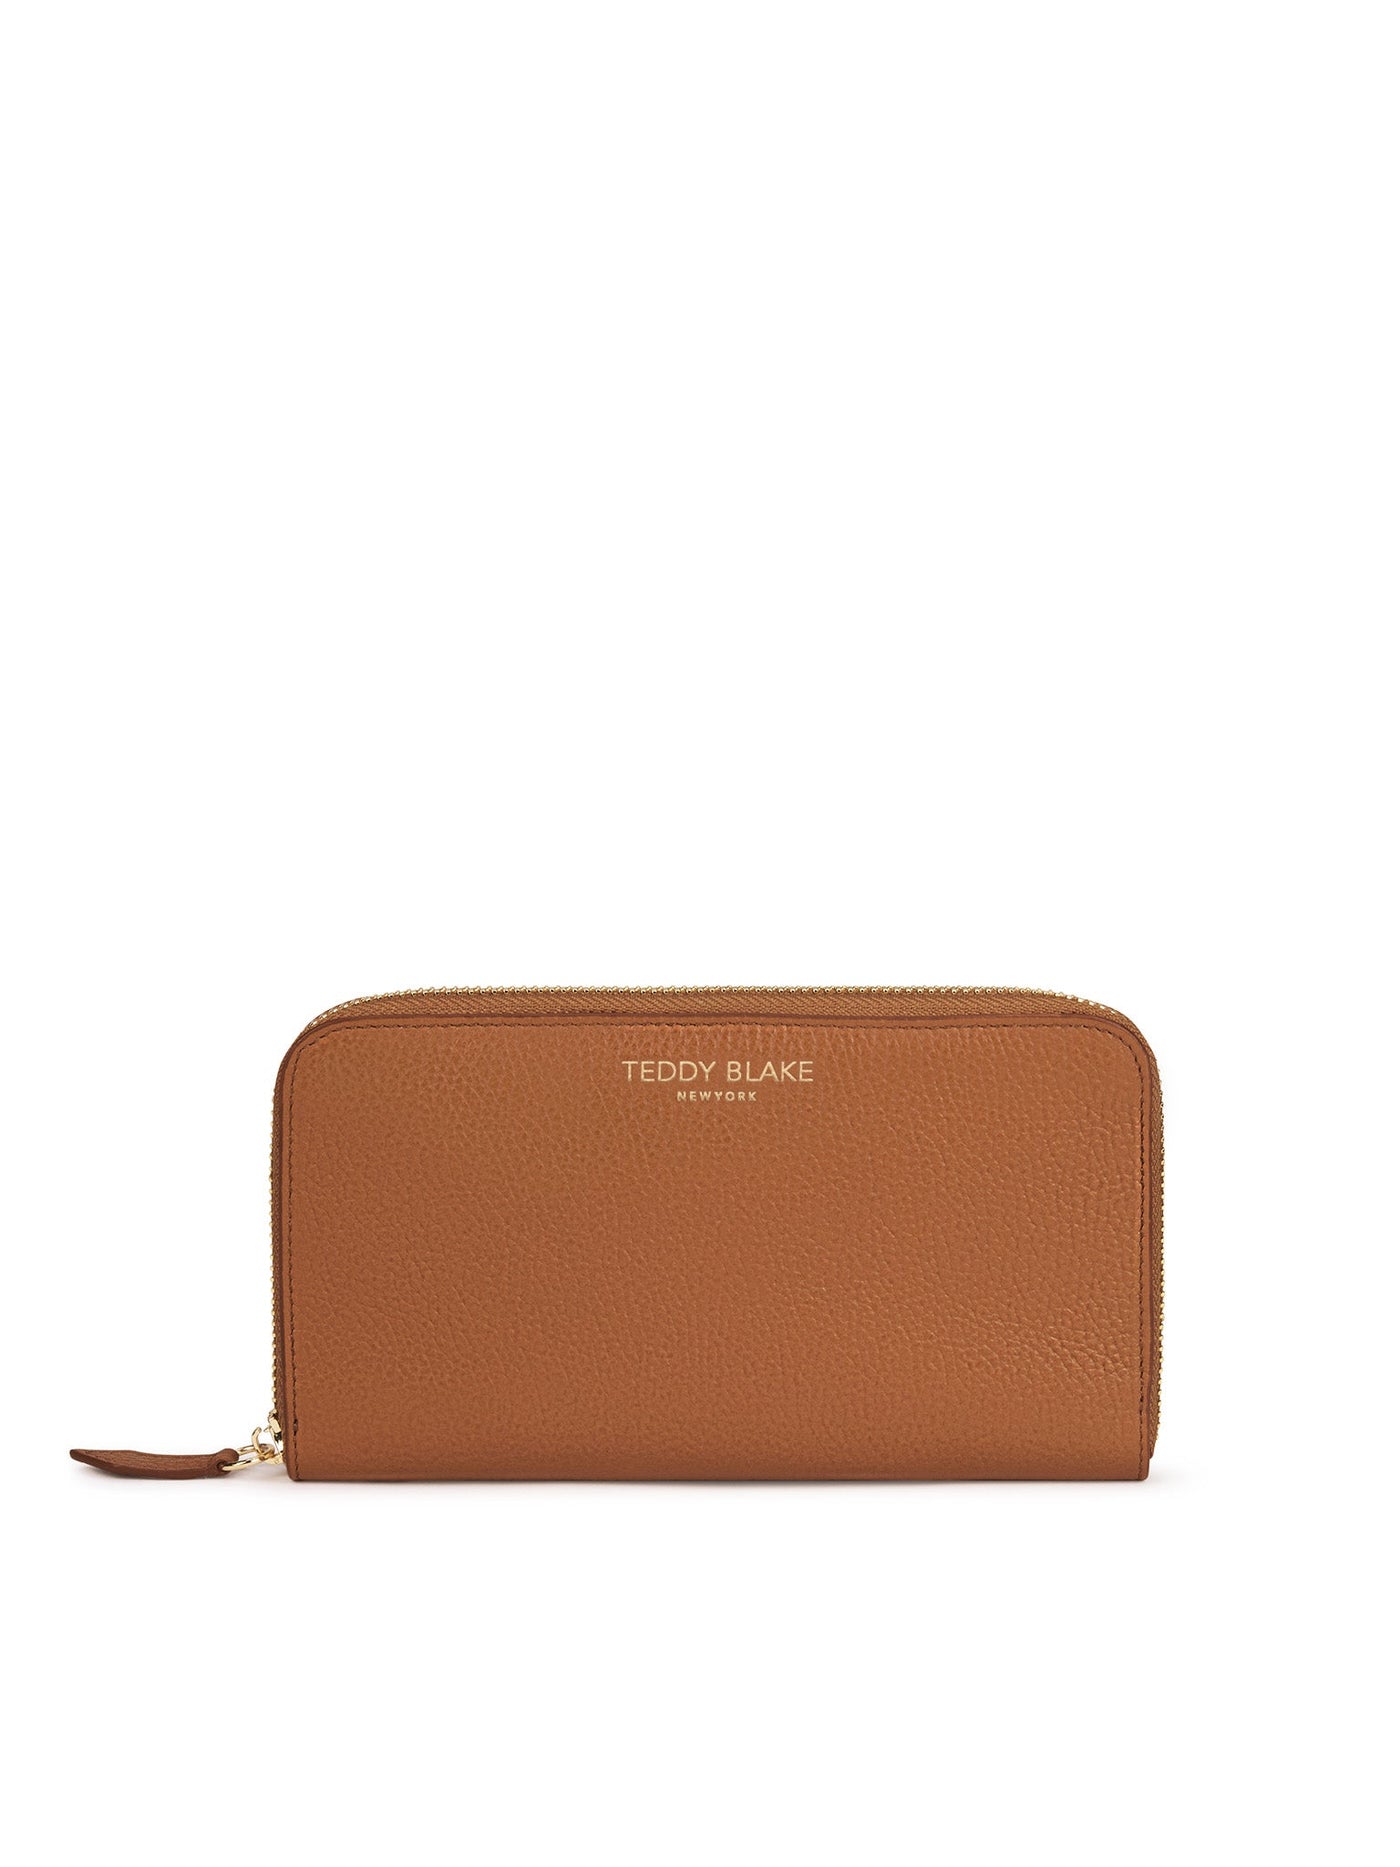 TB Zipwallet Stampato - Camel Brown